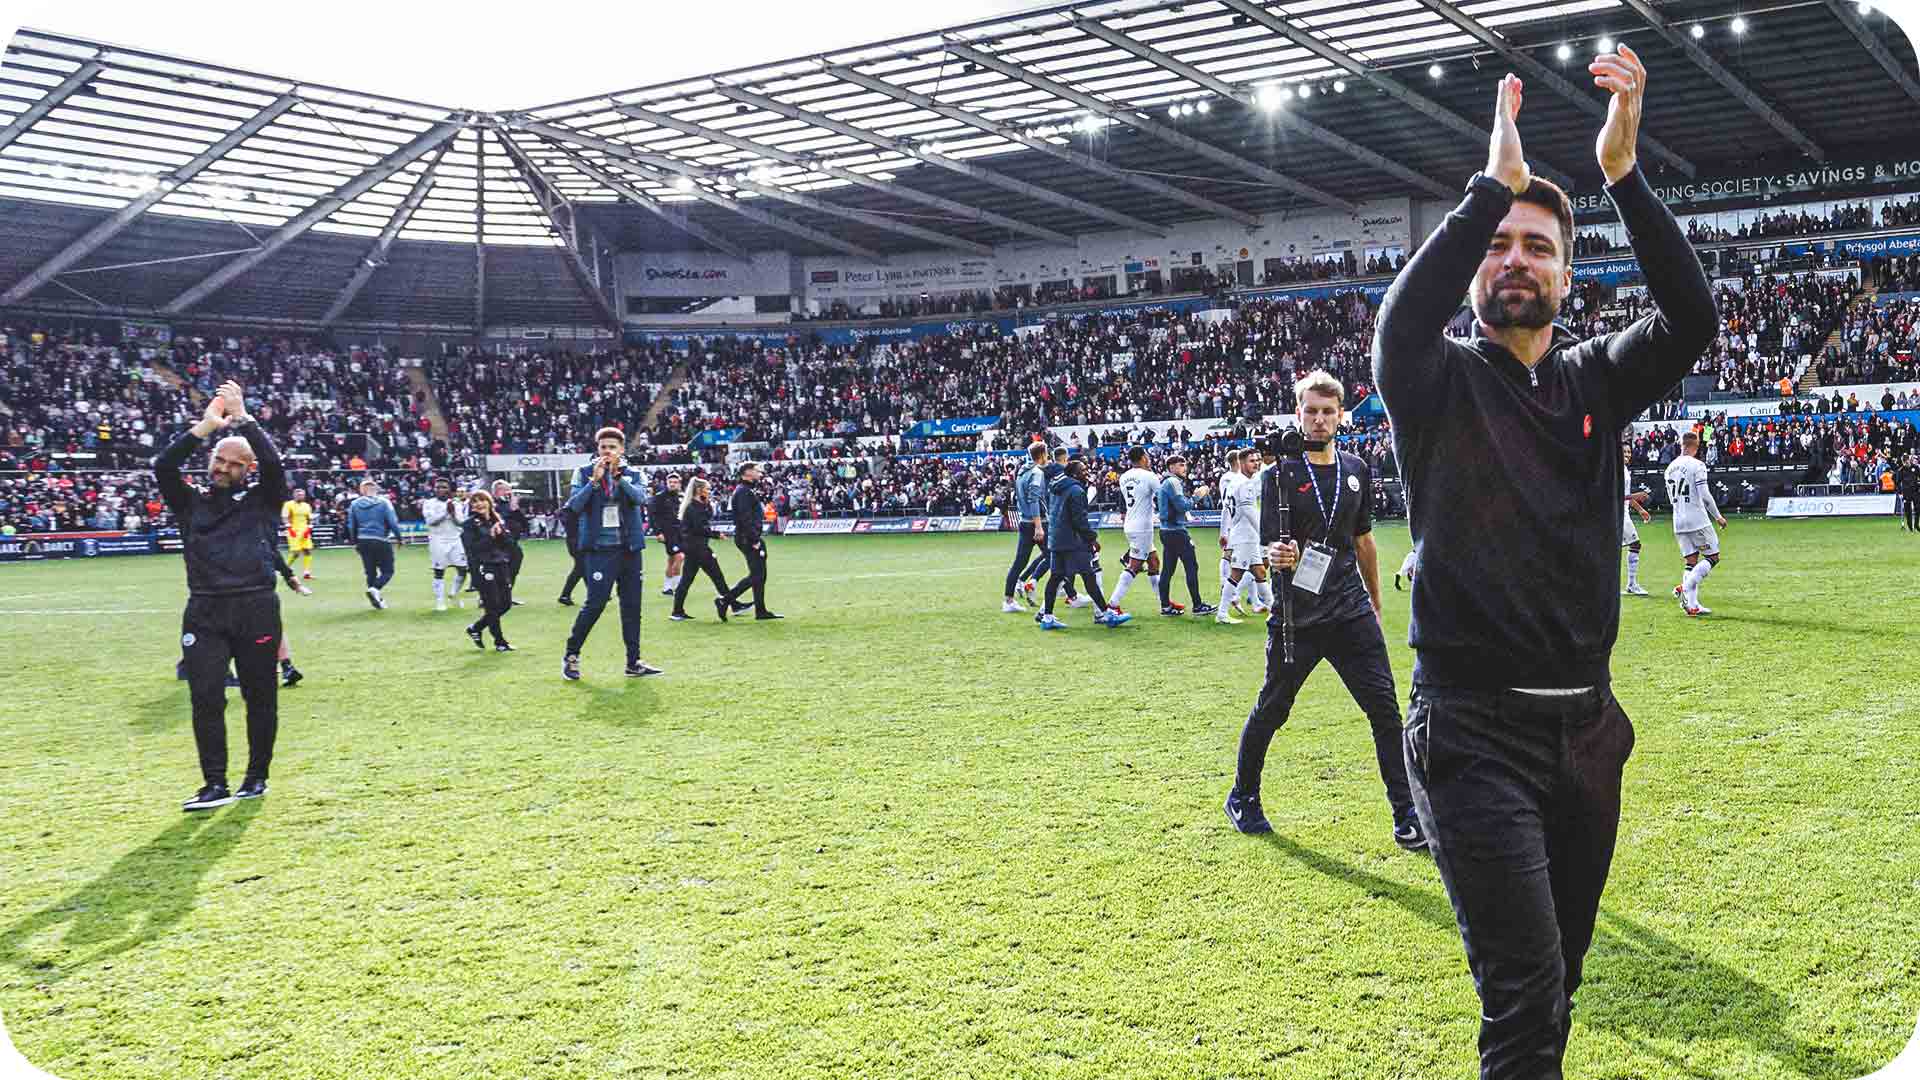 Luke and Russell celebrating beating Cardiff last time at the Swansea.com Stadium